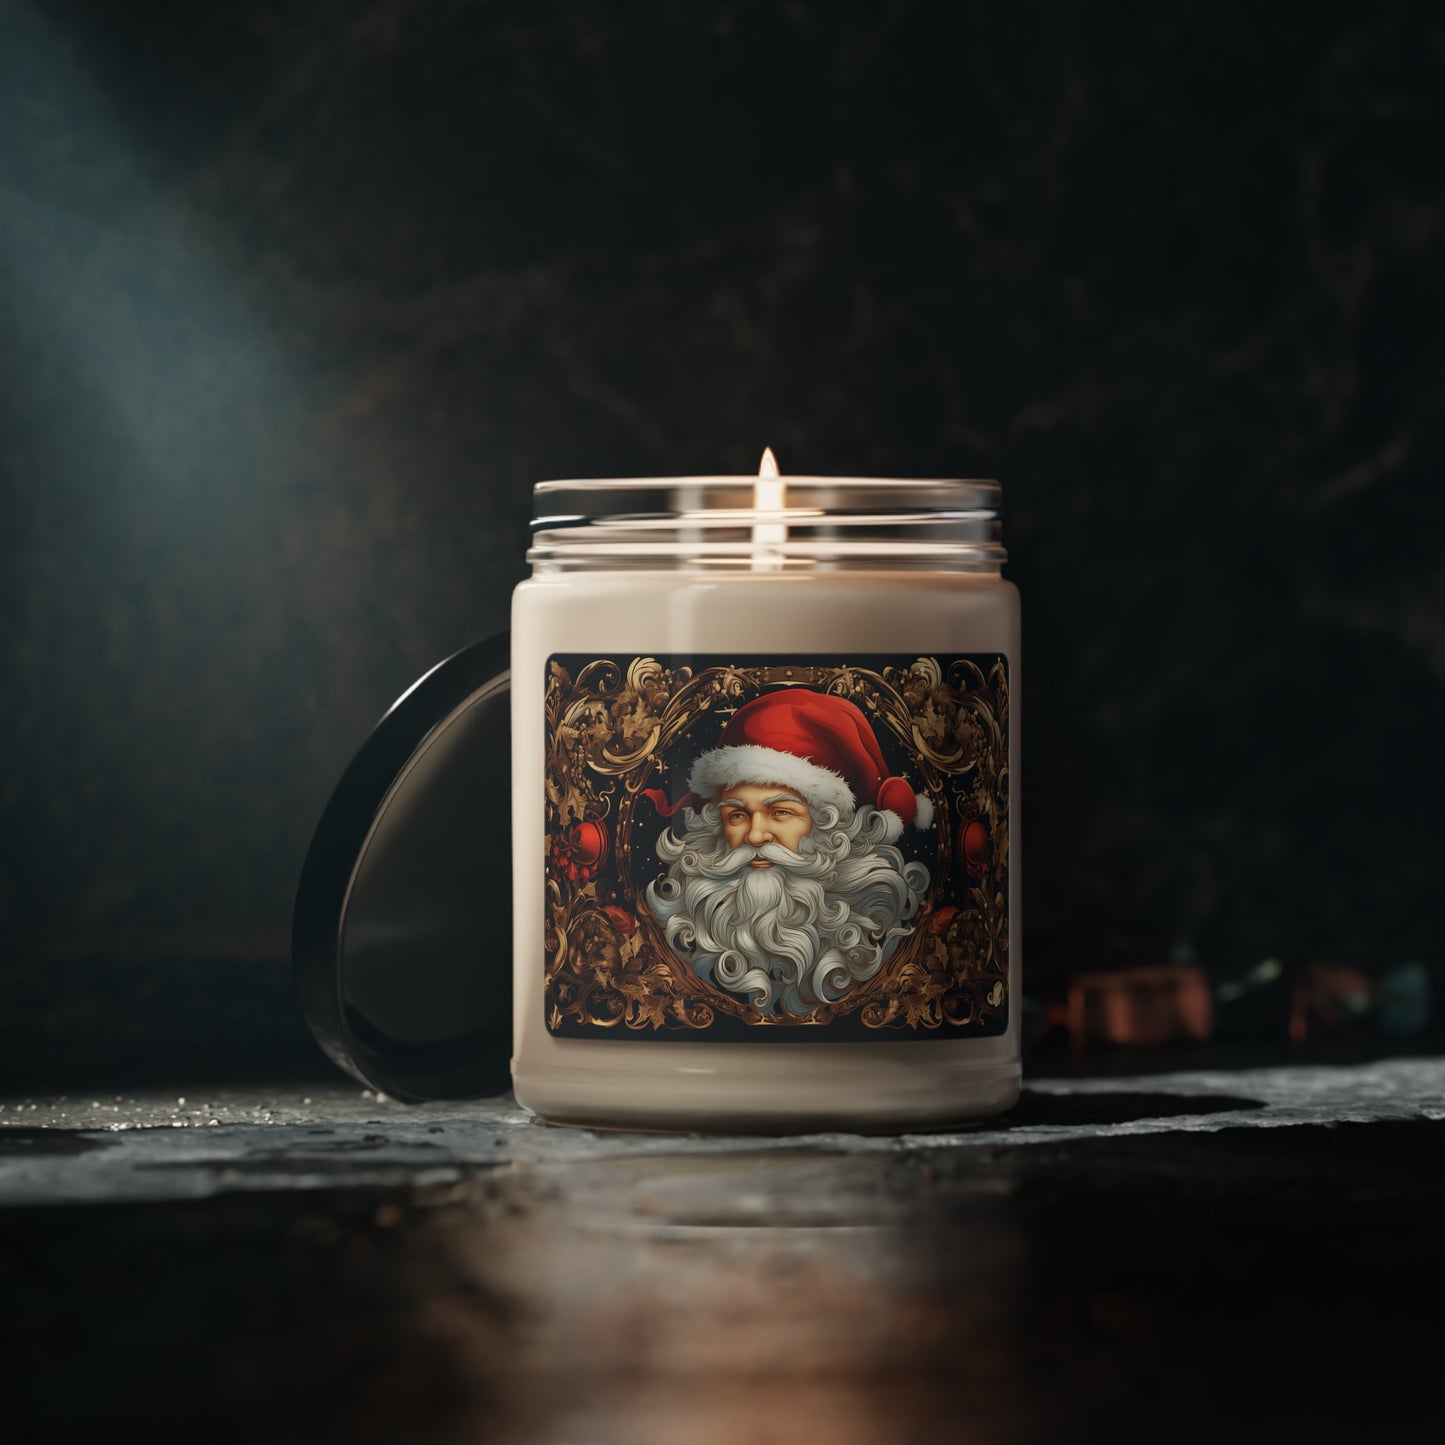 Santa Clause | Scented Soy Candle | 9oz |  50-60 hours of Burning Time